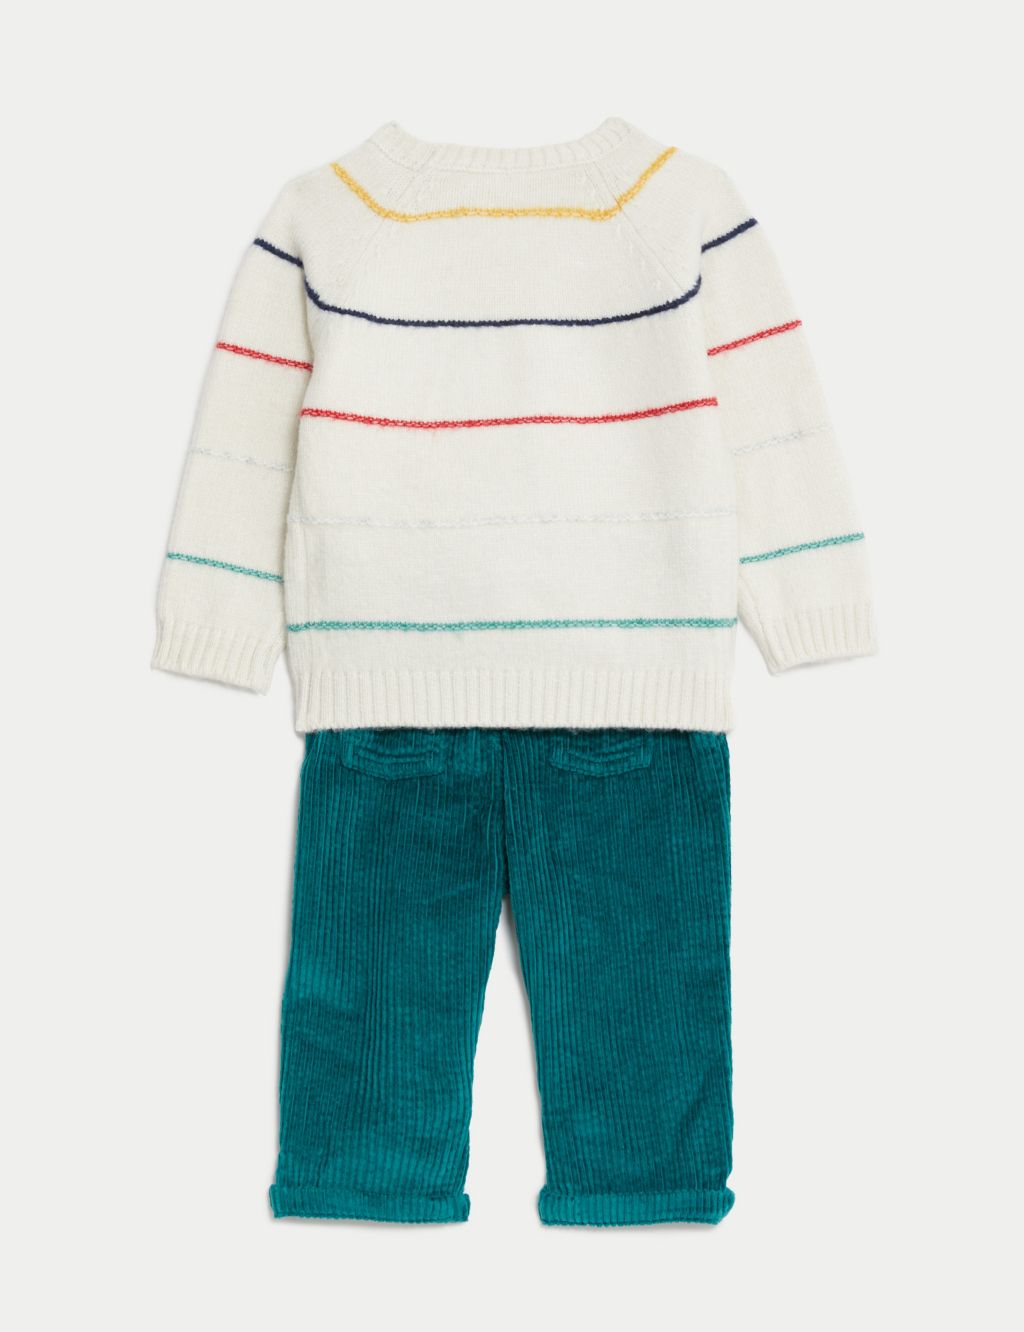 2pc Cotton Blend Striped Outfit (0-3 Yrs) image 2